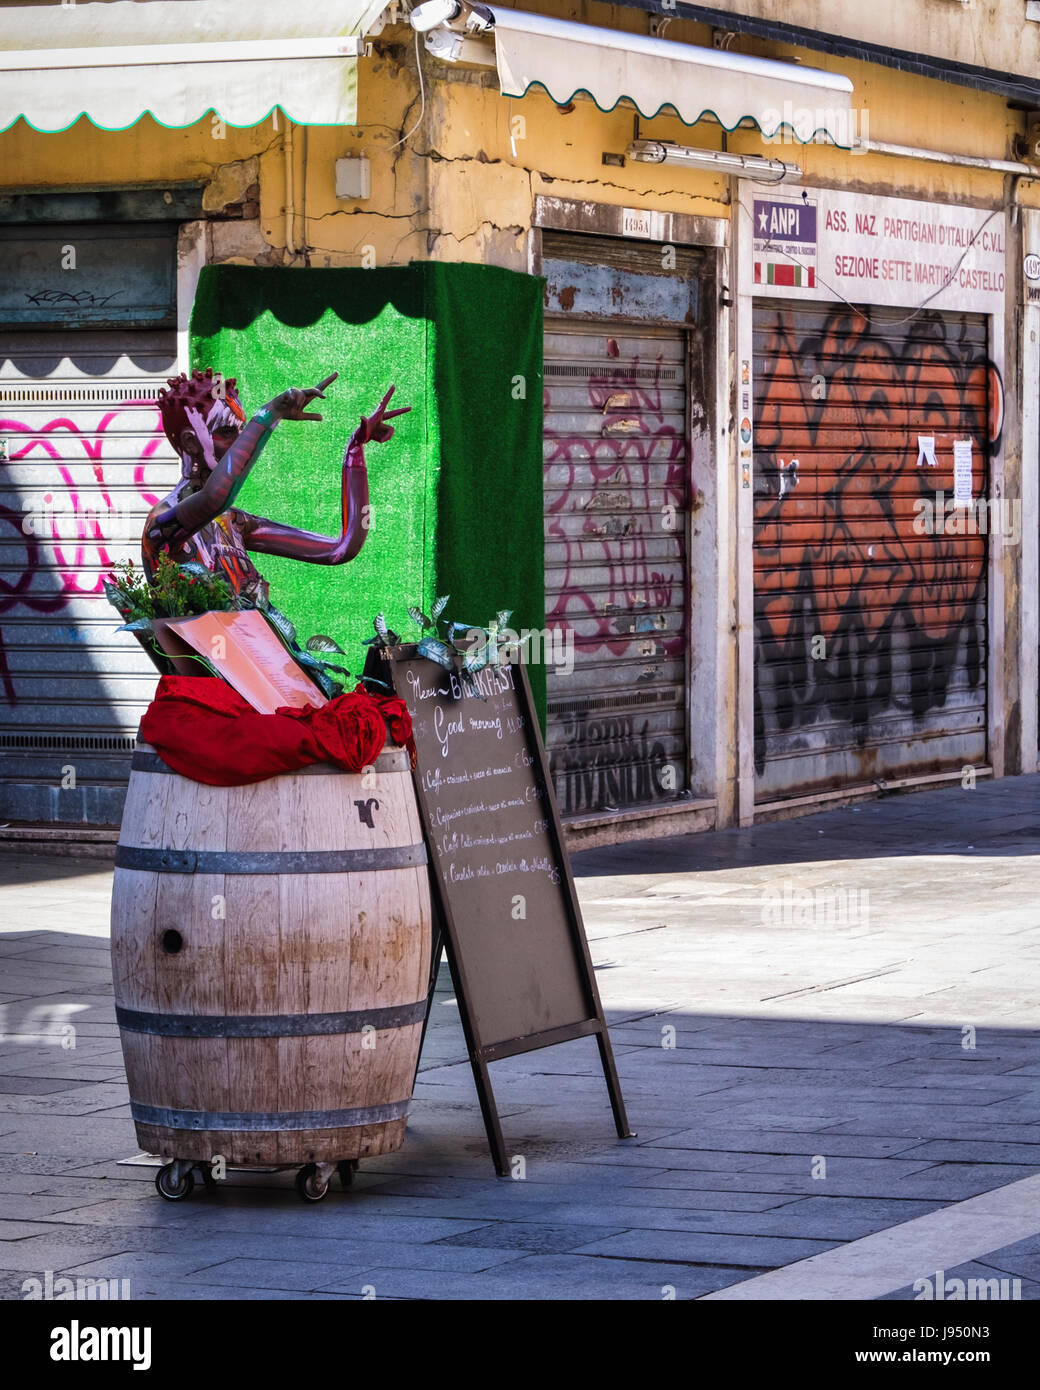 Venice,Italy. Menu of Typical coffee bar,restaurant,cafe with painted mannequin in Via Garribaldi Stock Photo